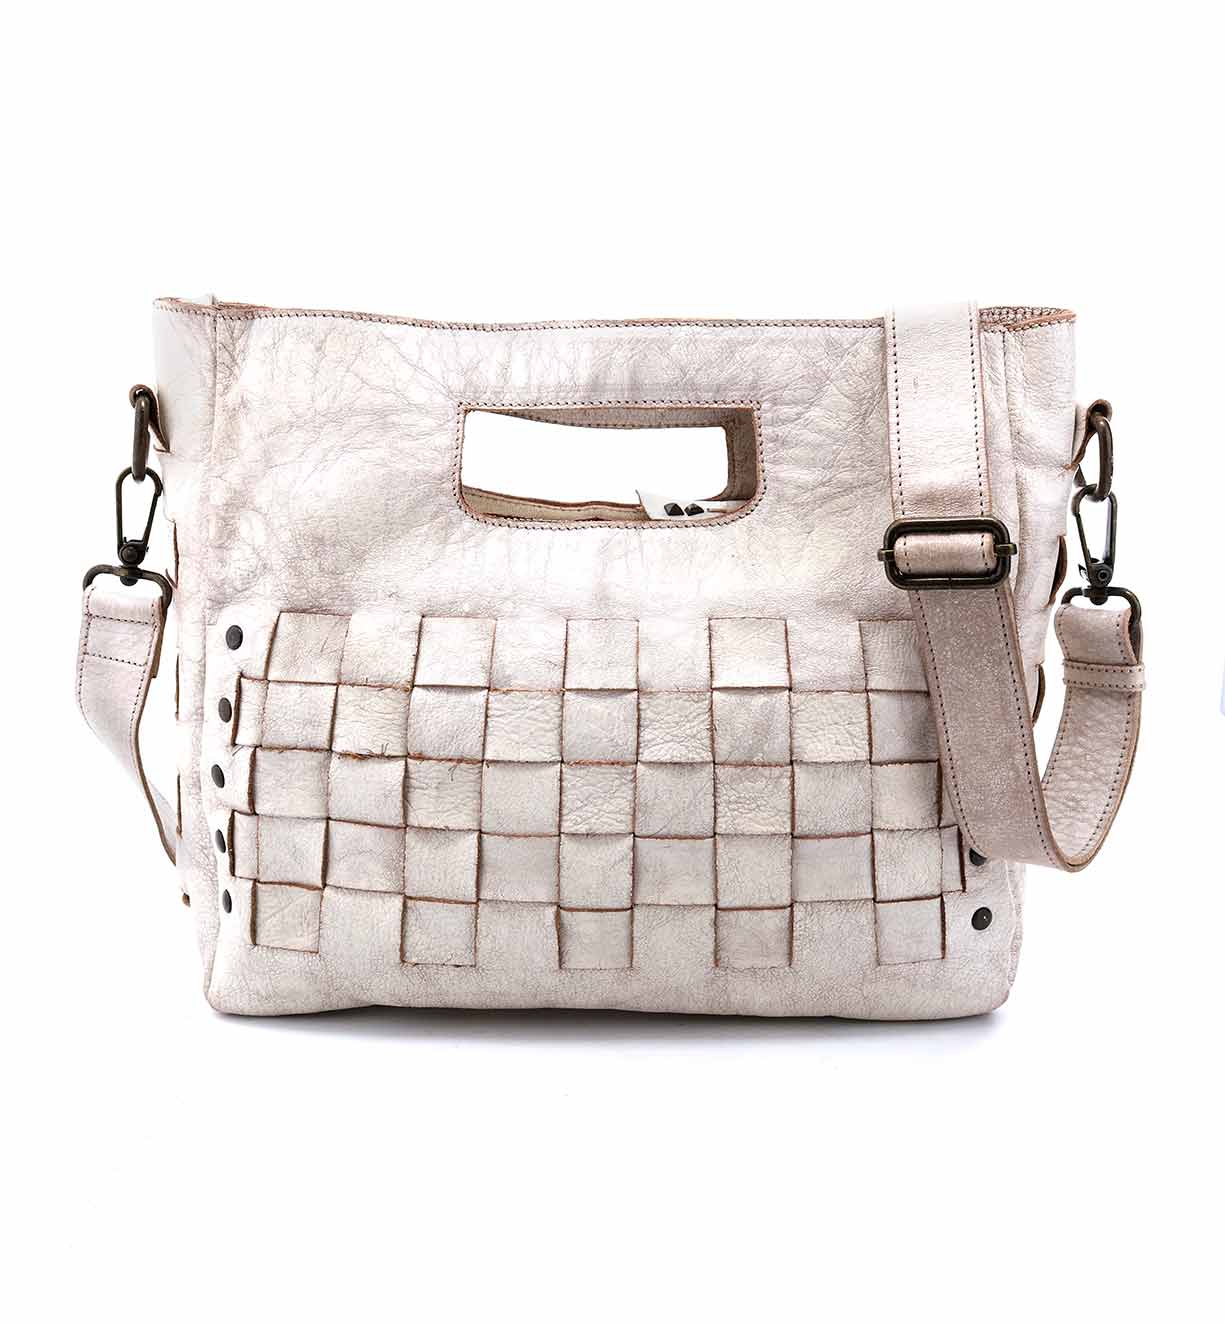 A distressed white Orchid leather bag with a strap and handles by Bed Stu.